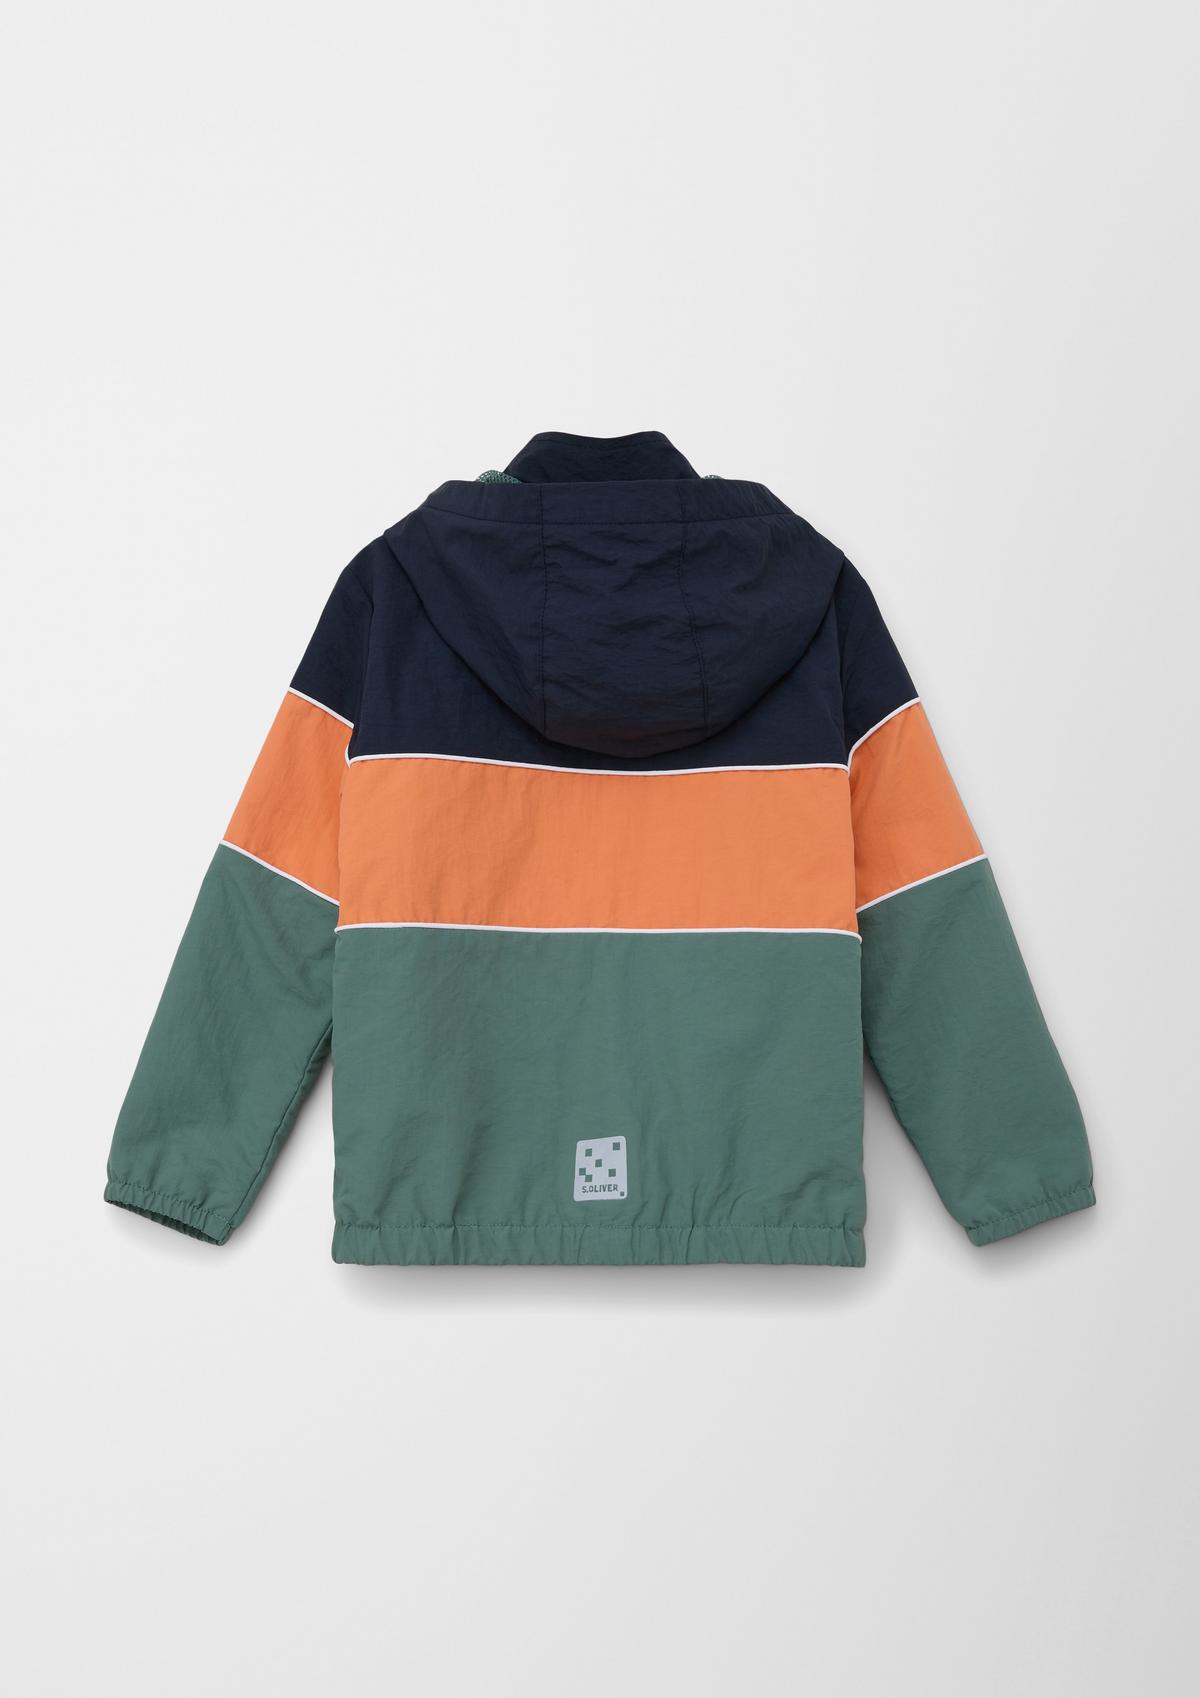 s.Oliver Windbreaker with contrasting details